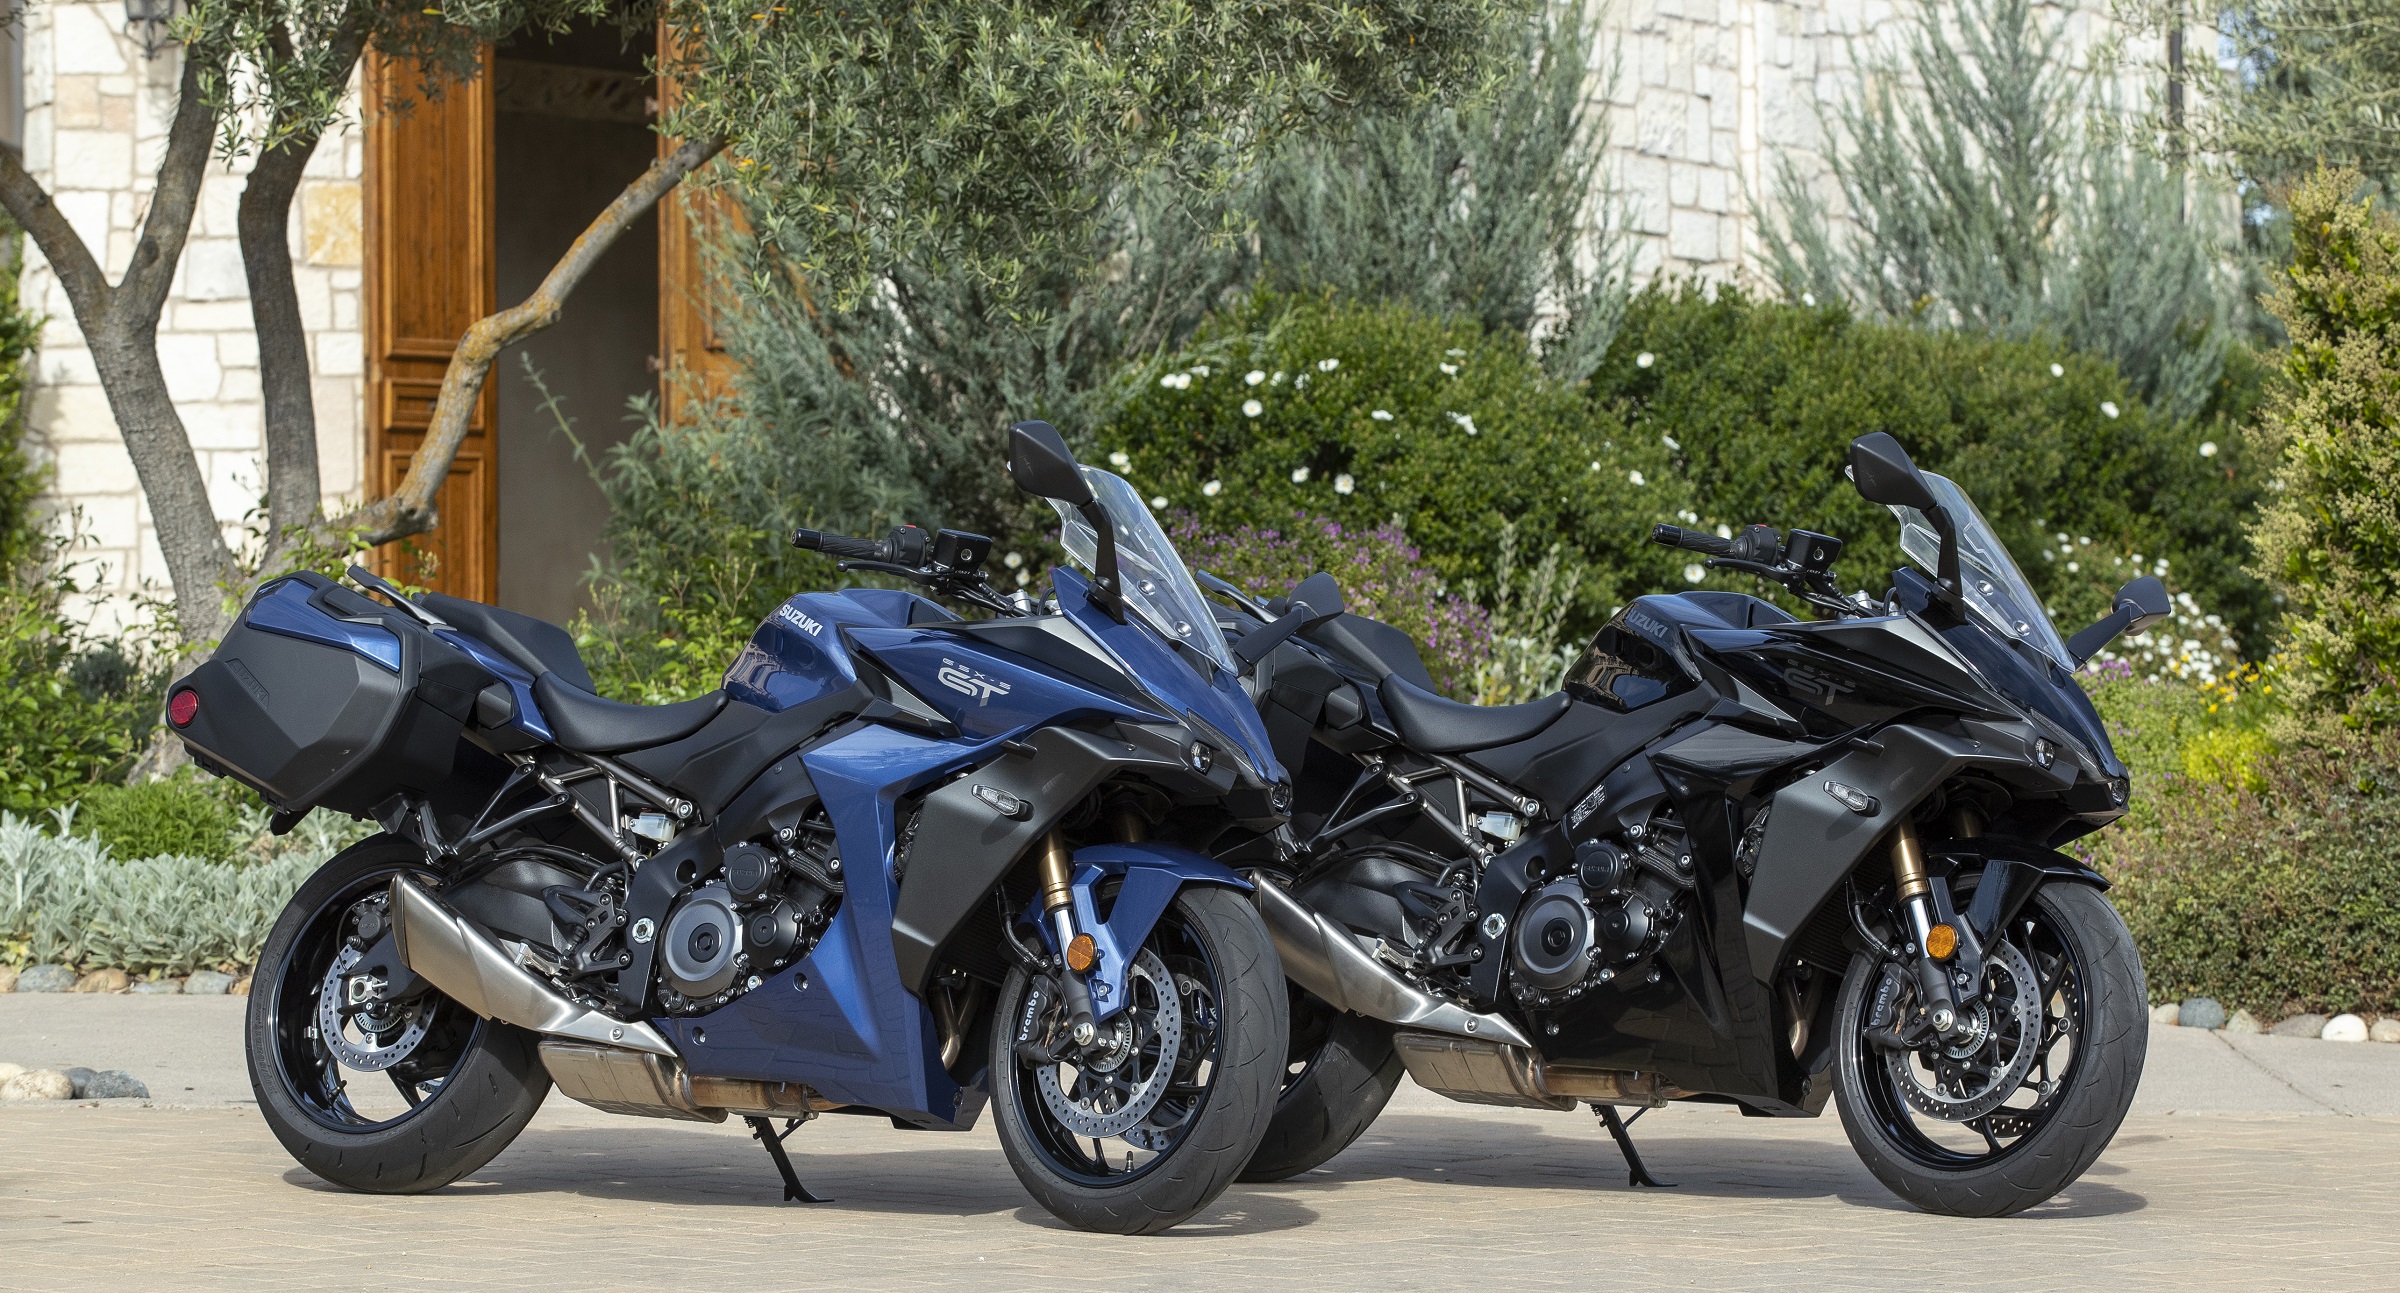 The Suzuki GSX-S1000GT+ is available in the United States in Metallic Reflective Blue and Glass Sparkle Black colors